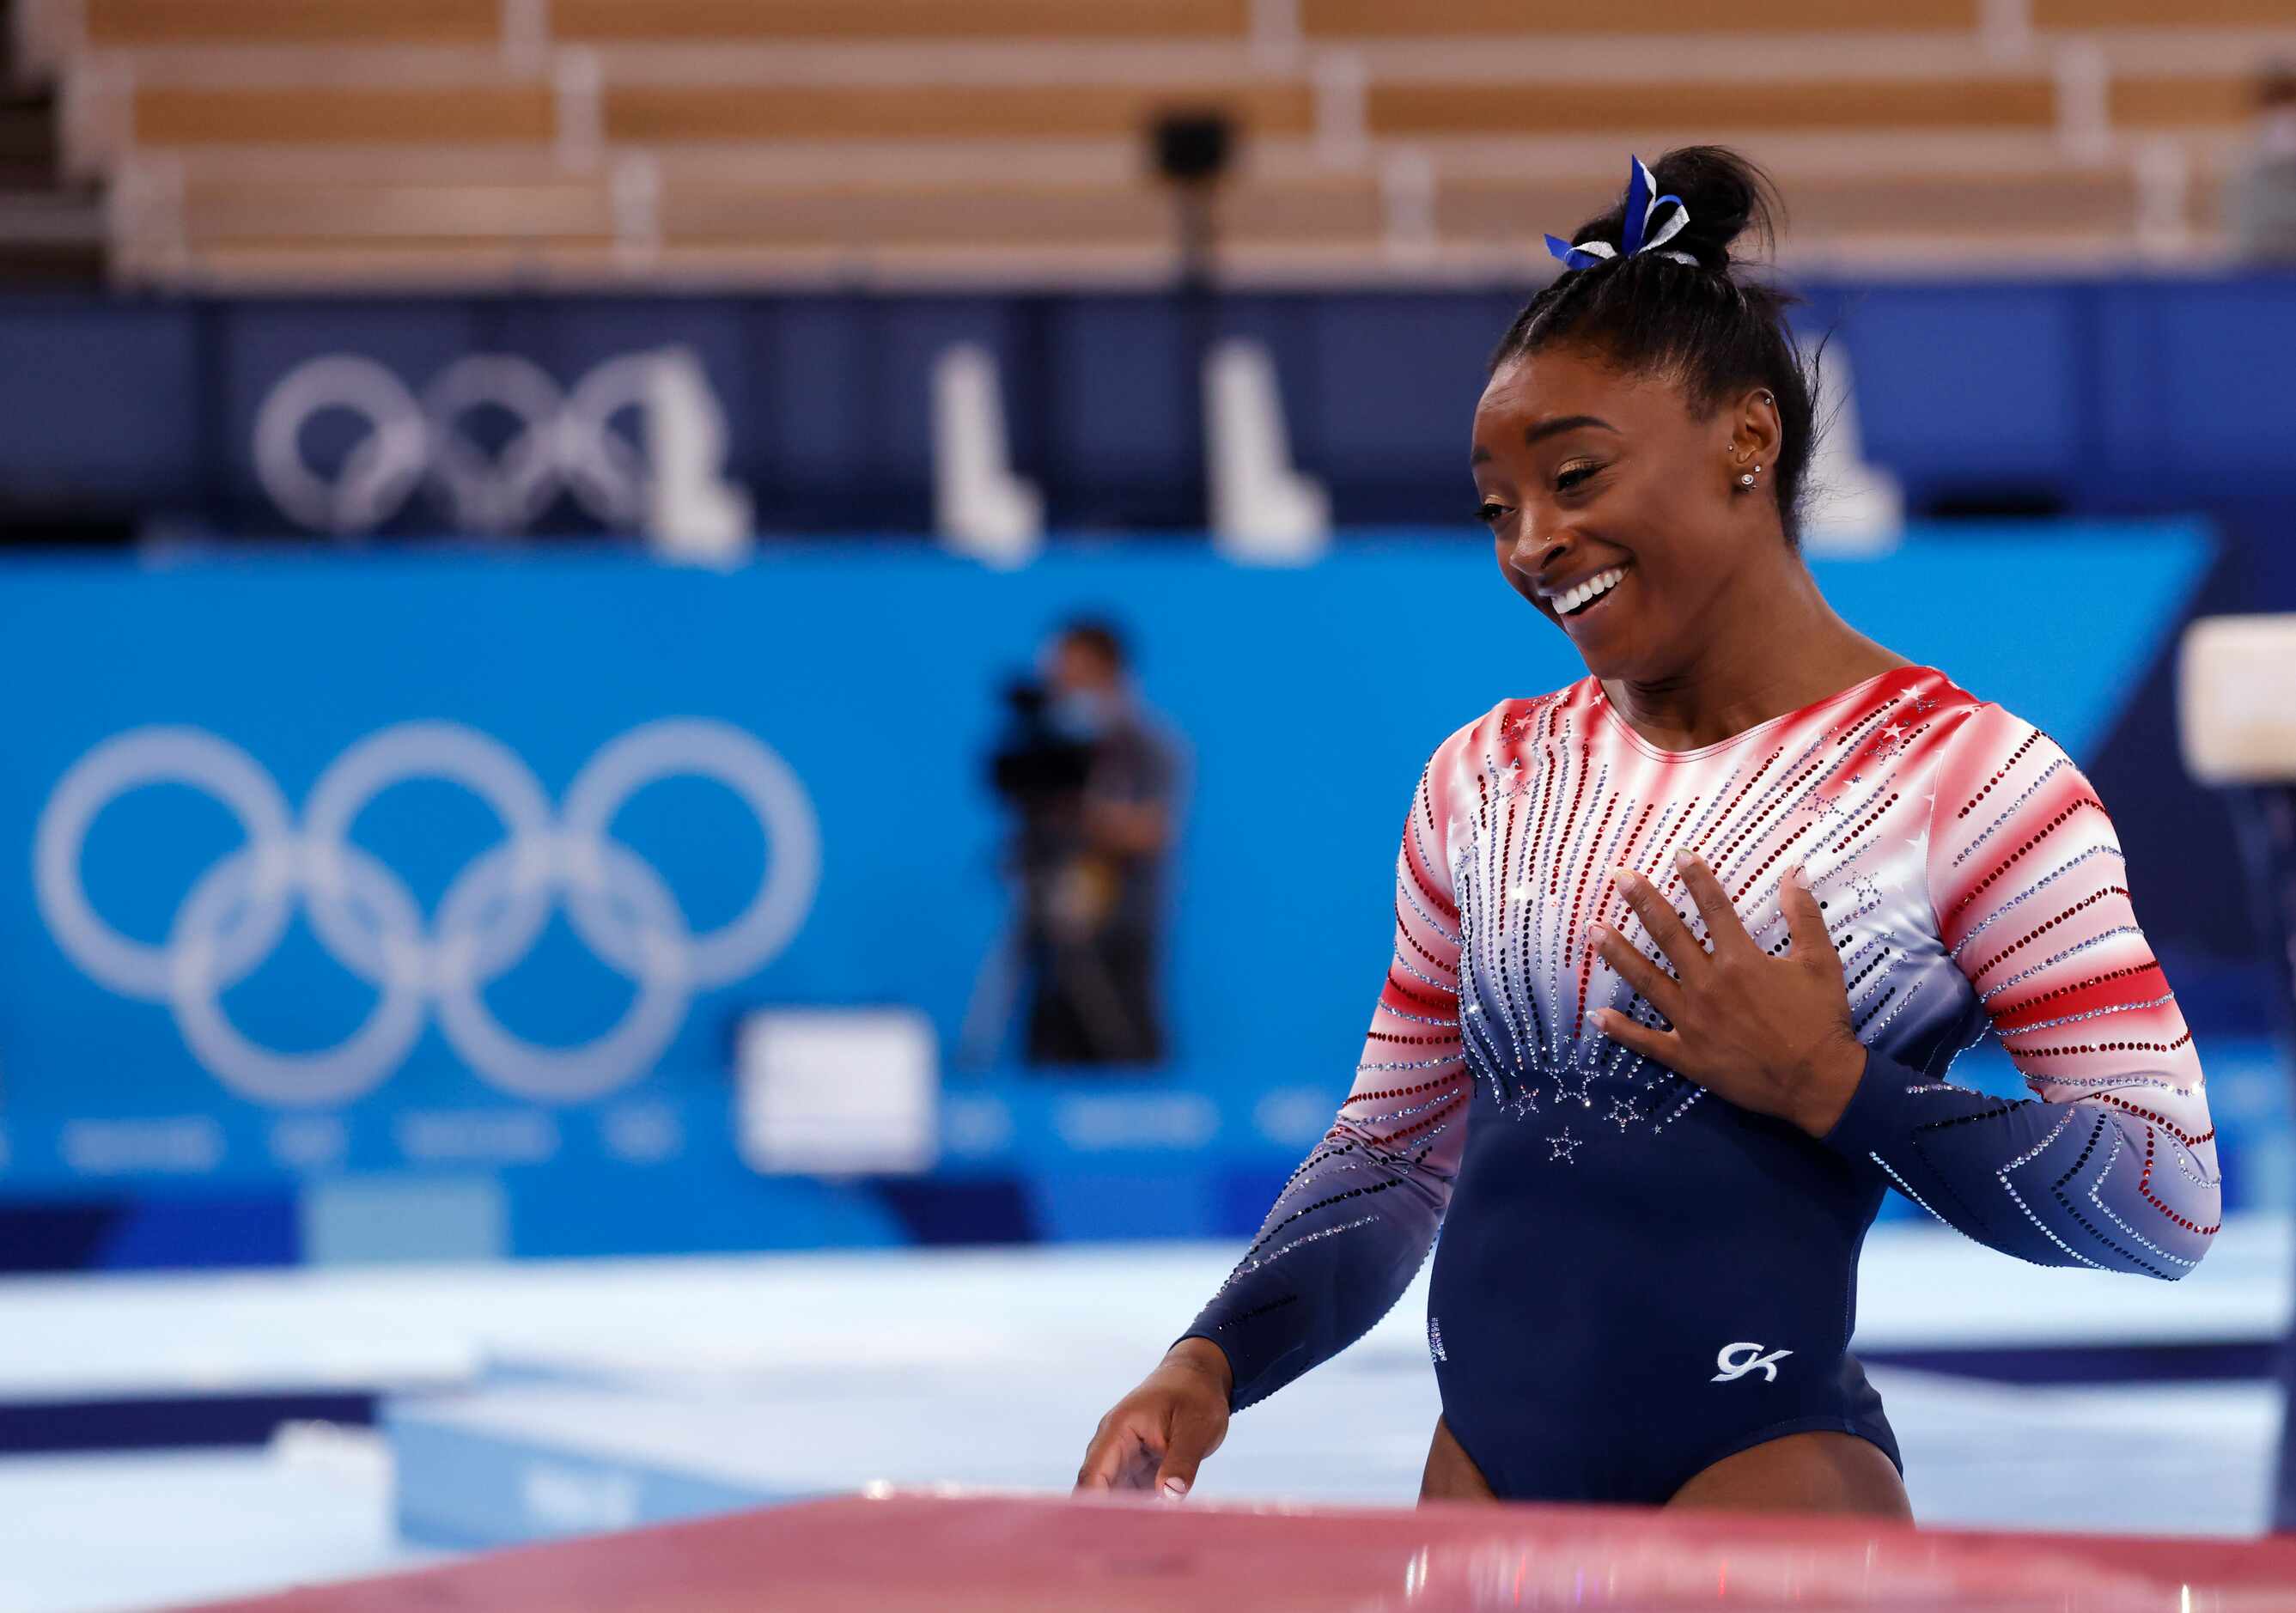 USA’s Simone Biles after competing in the women’s balance beam final at the postponed 2020...